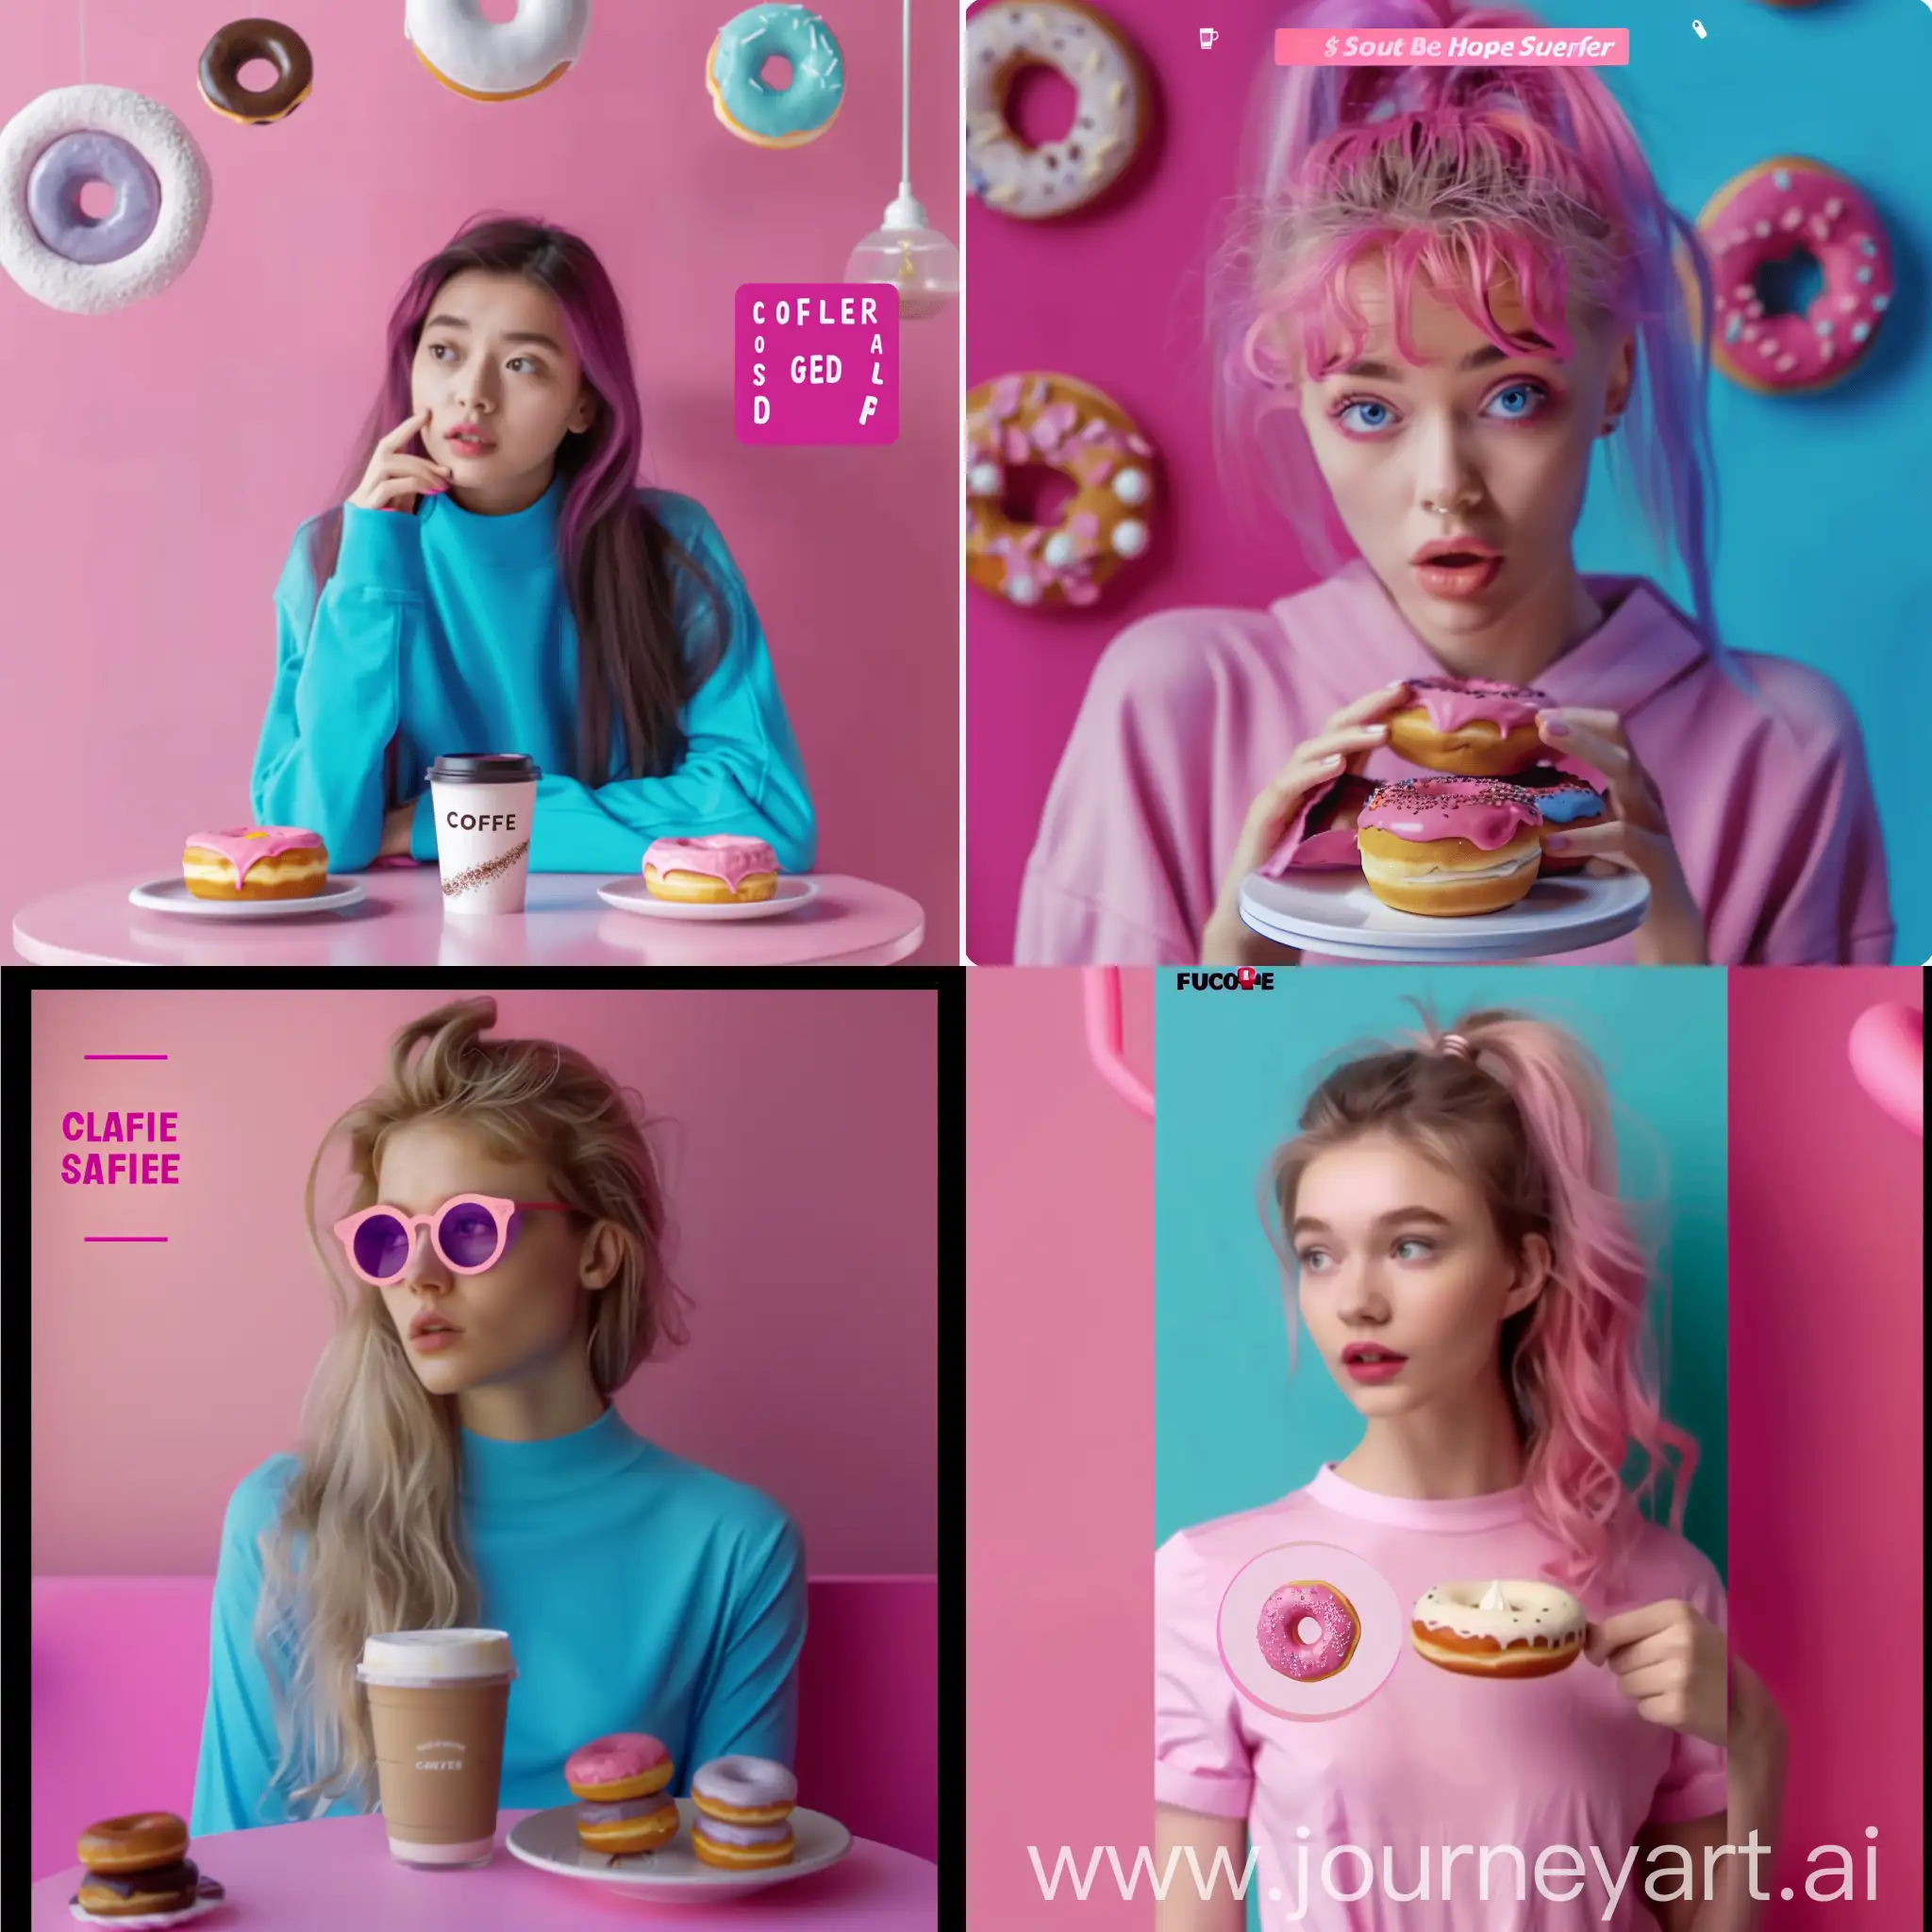 make a similar image without text, for a coffee shop application, with coffee and donuts and other pastries, let it be minimalistic and using pink and blue colors, the background in the same color, pink or blue, studio light, with a girl model